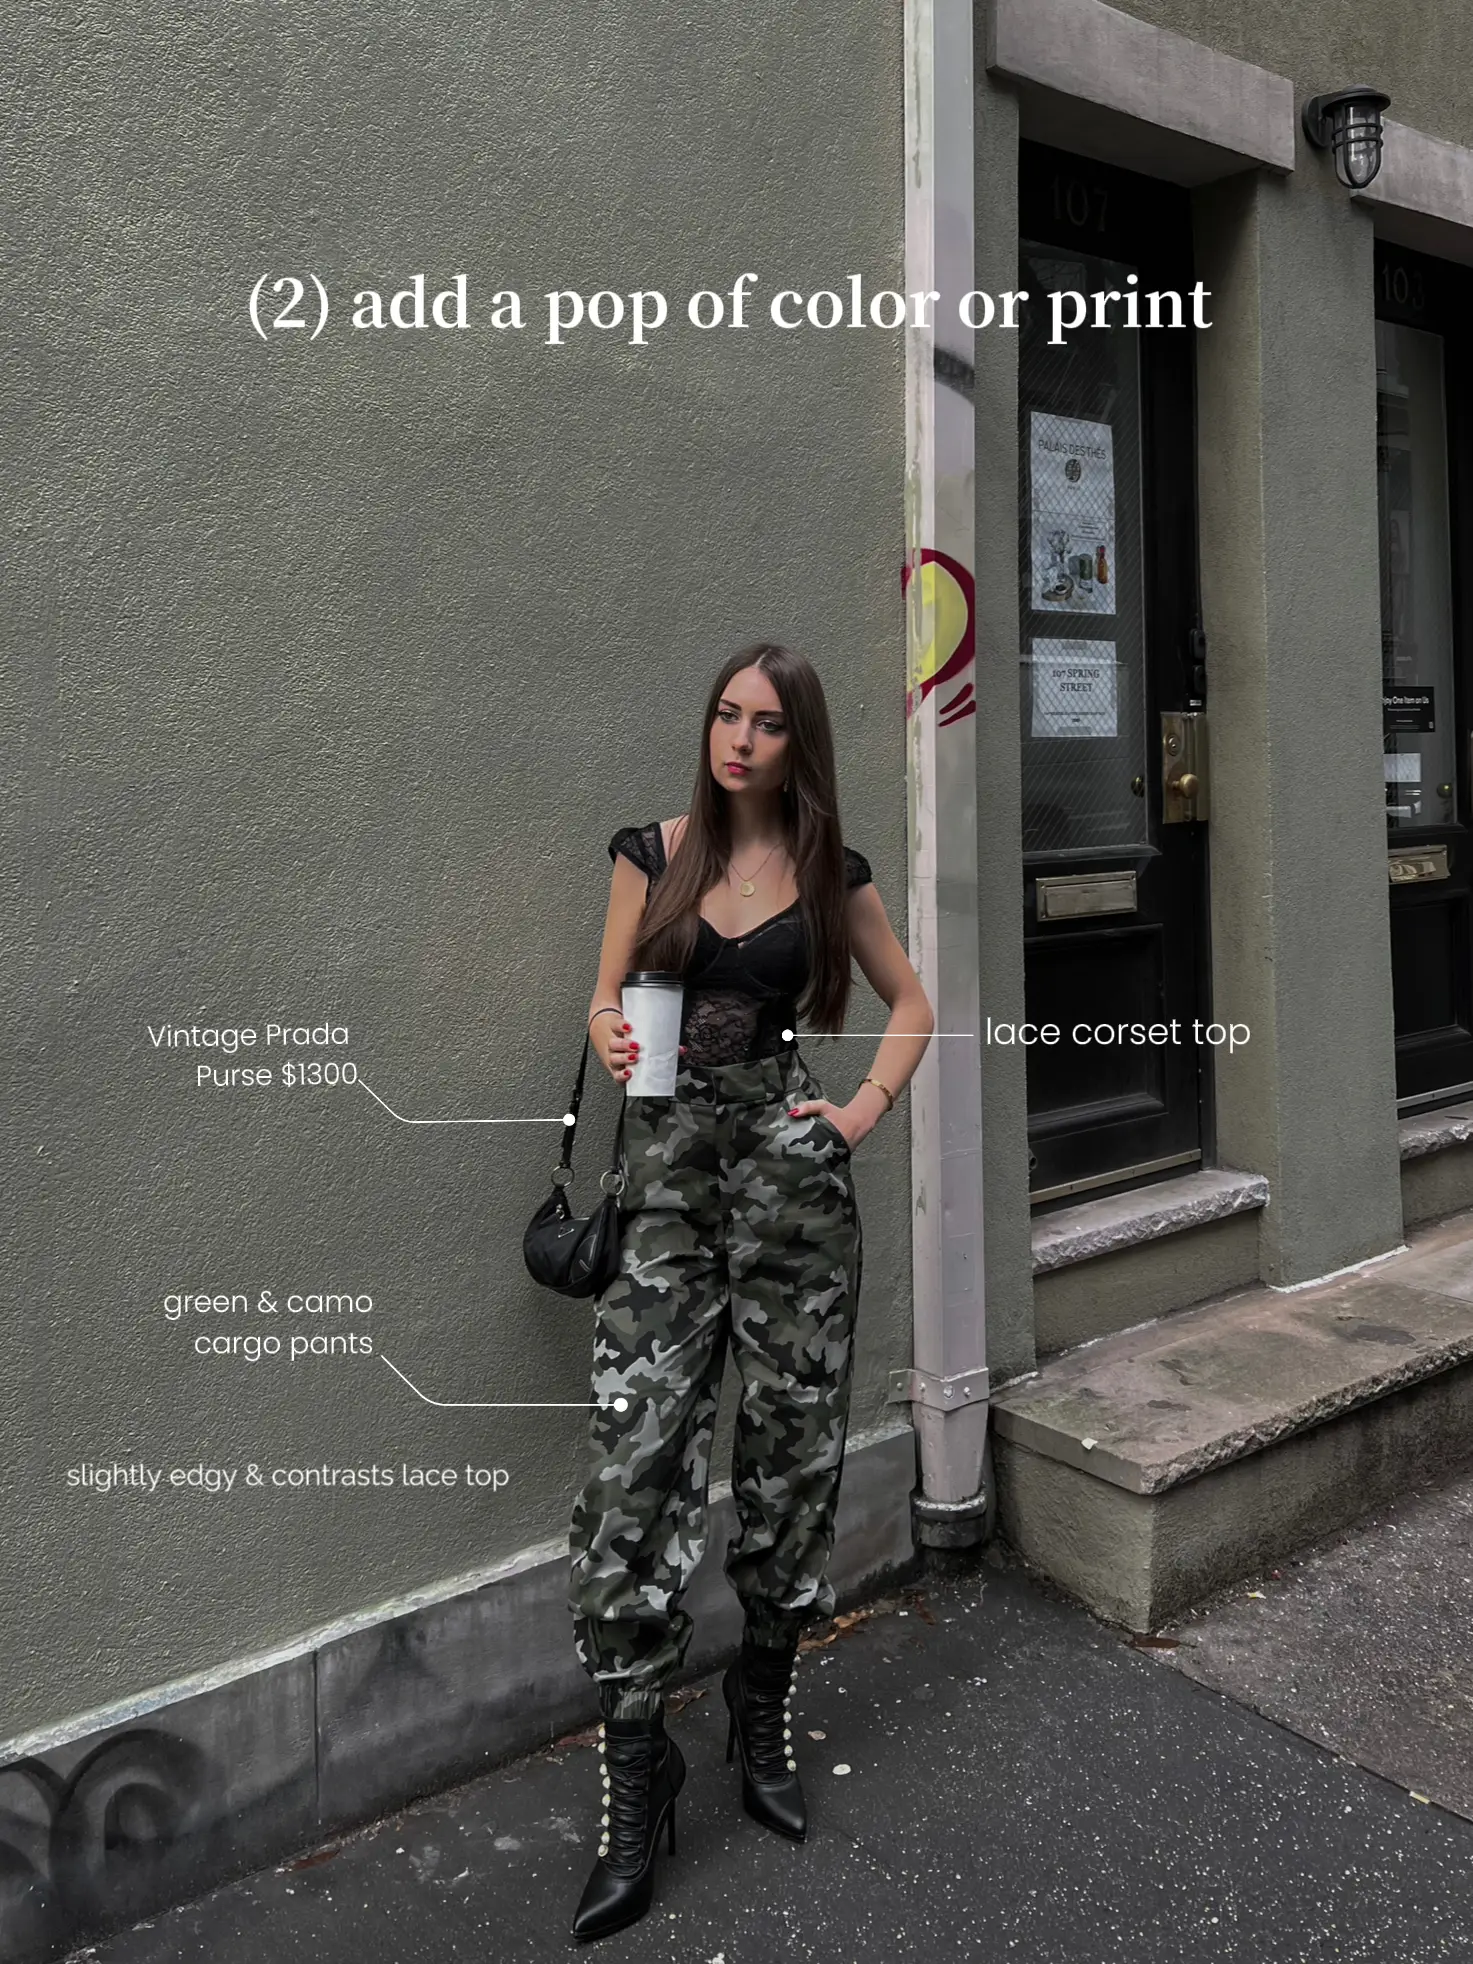 how to style cargo pants with corset tops - Lemon8 Search